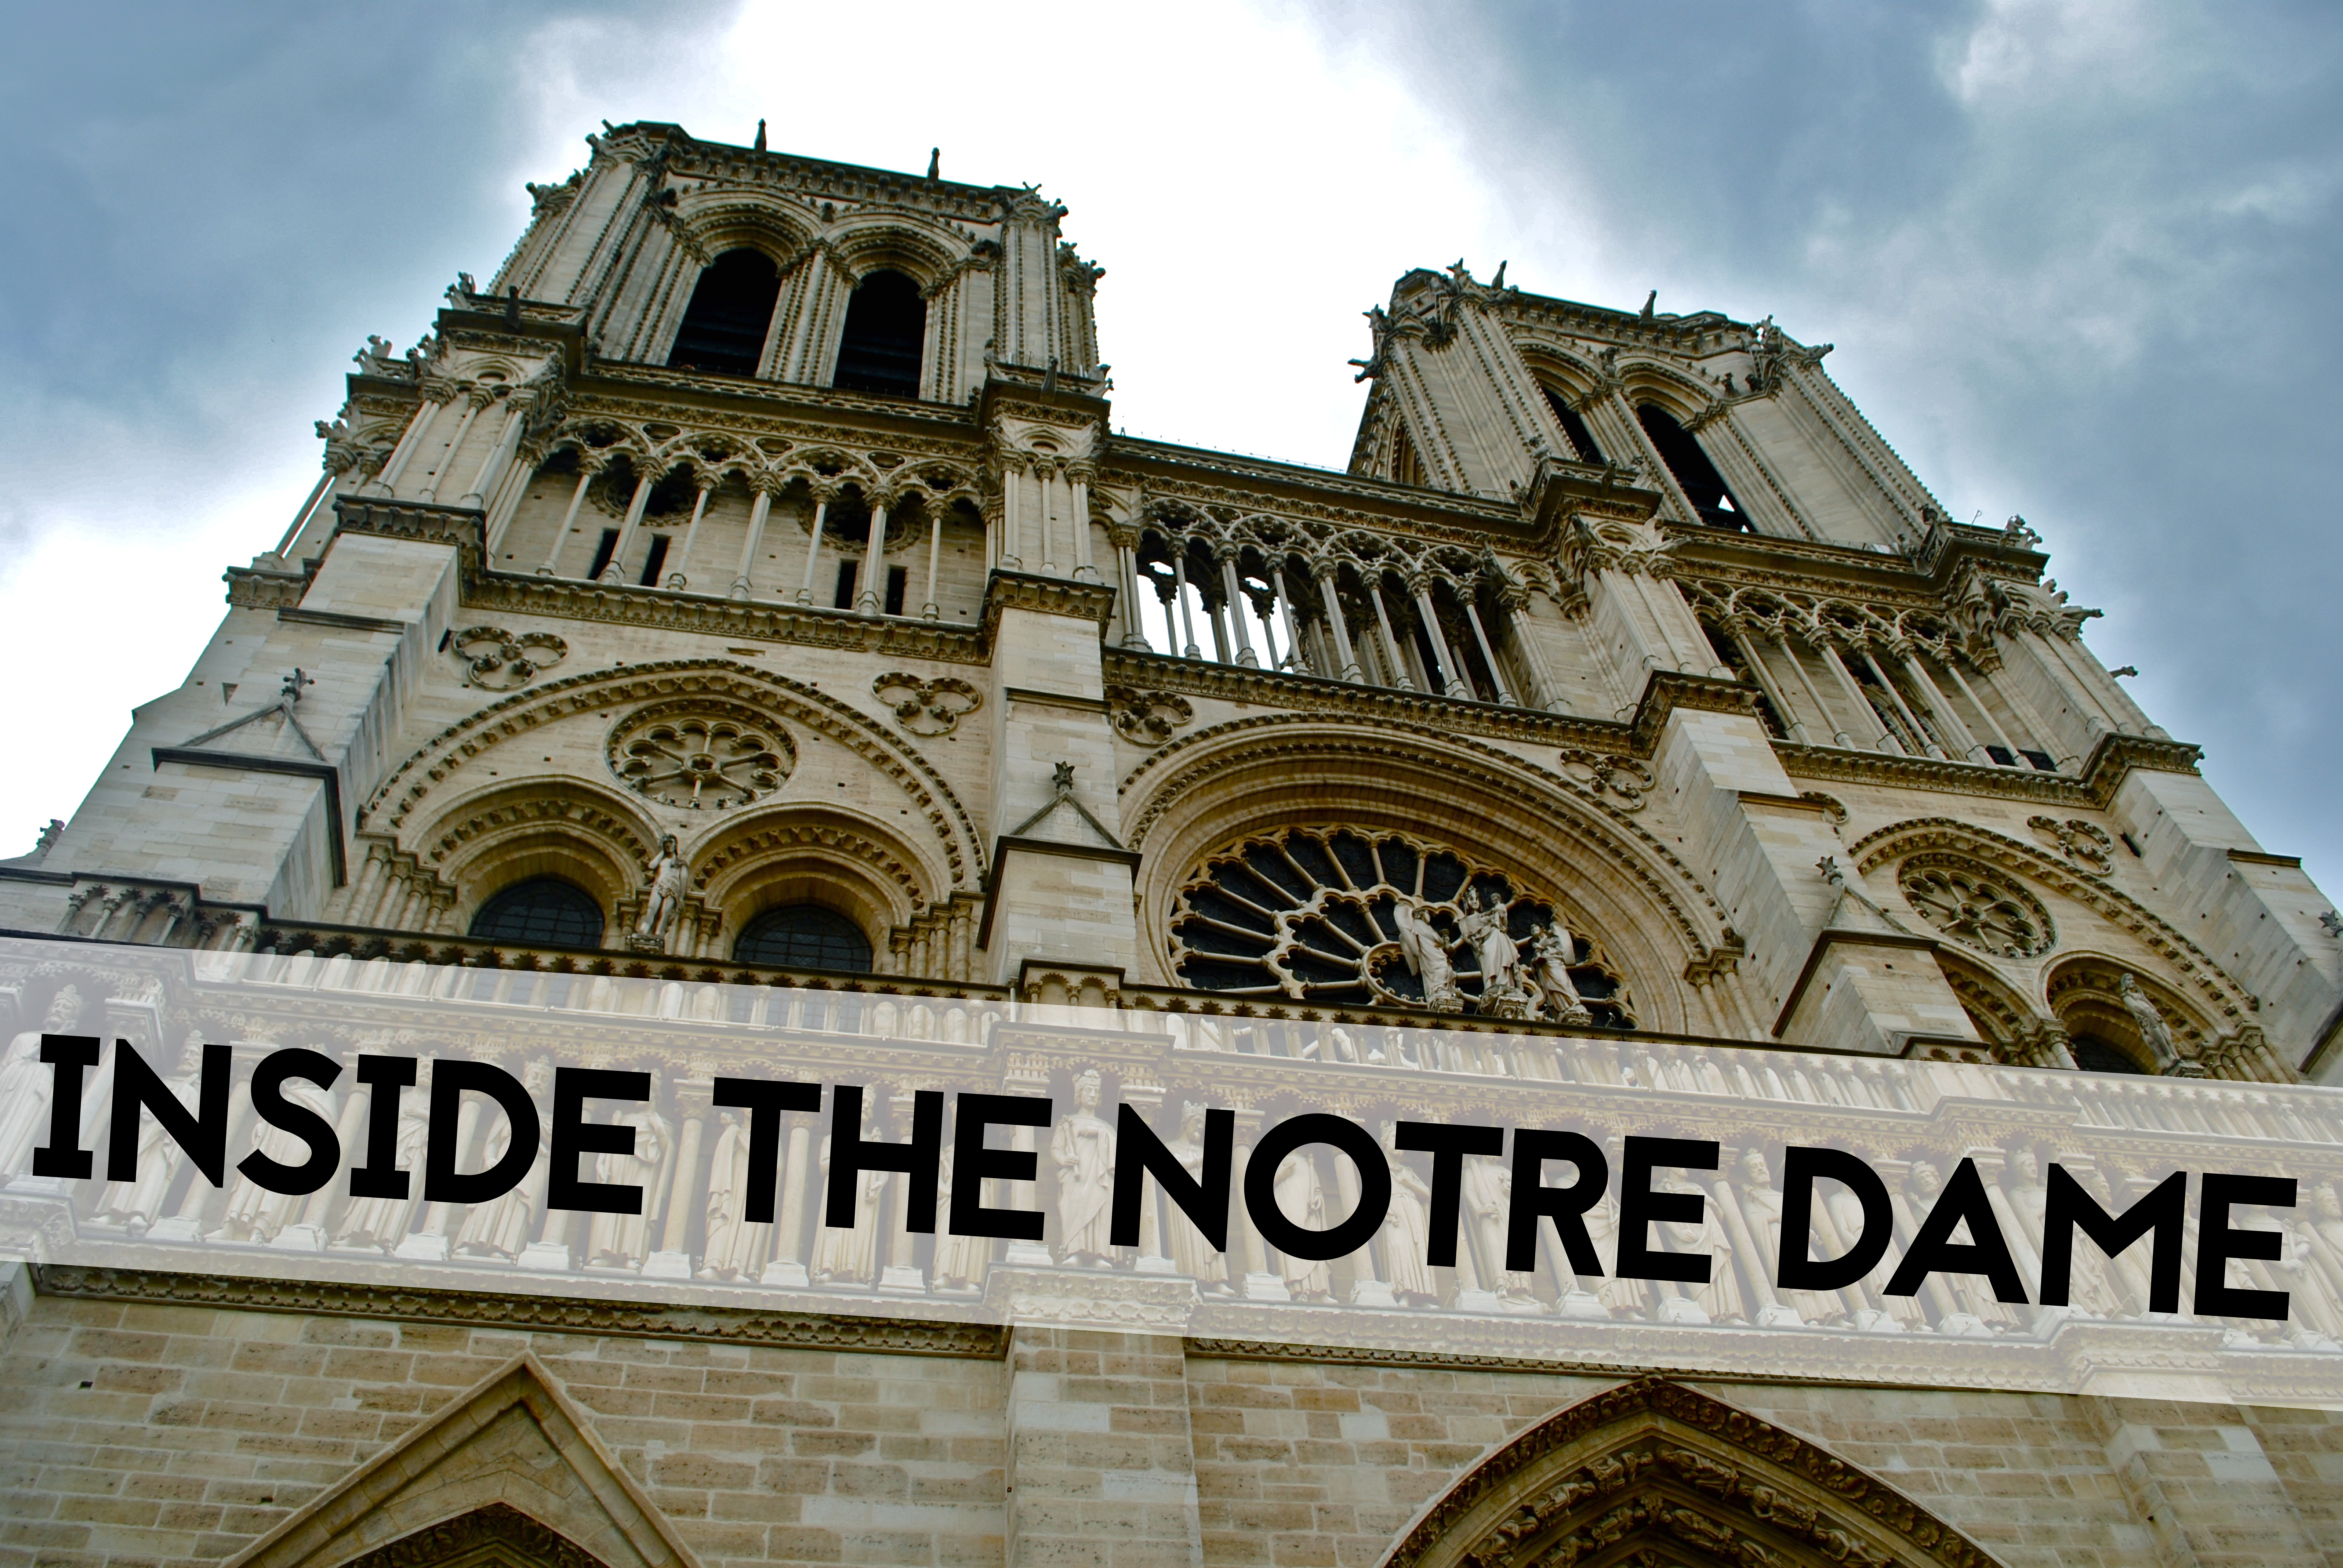 Inside the Notre Dame